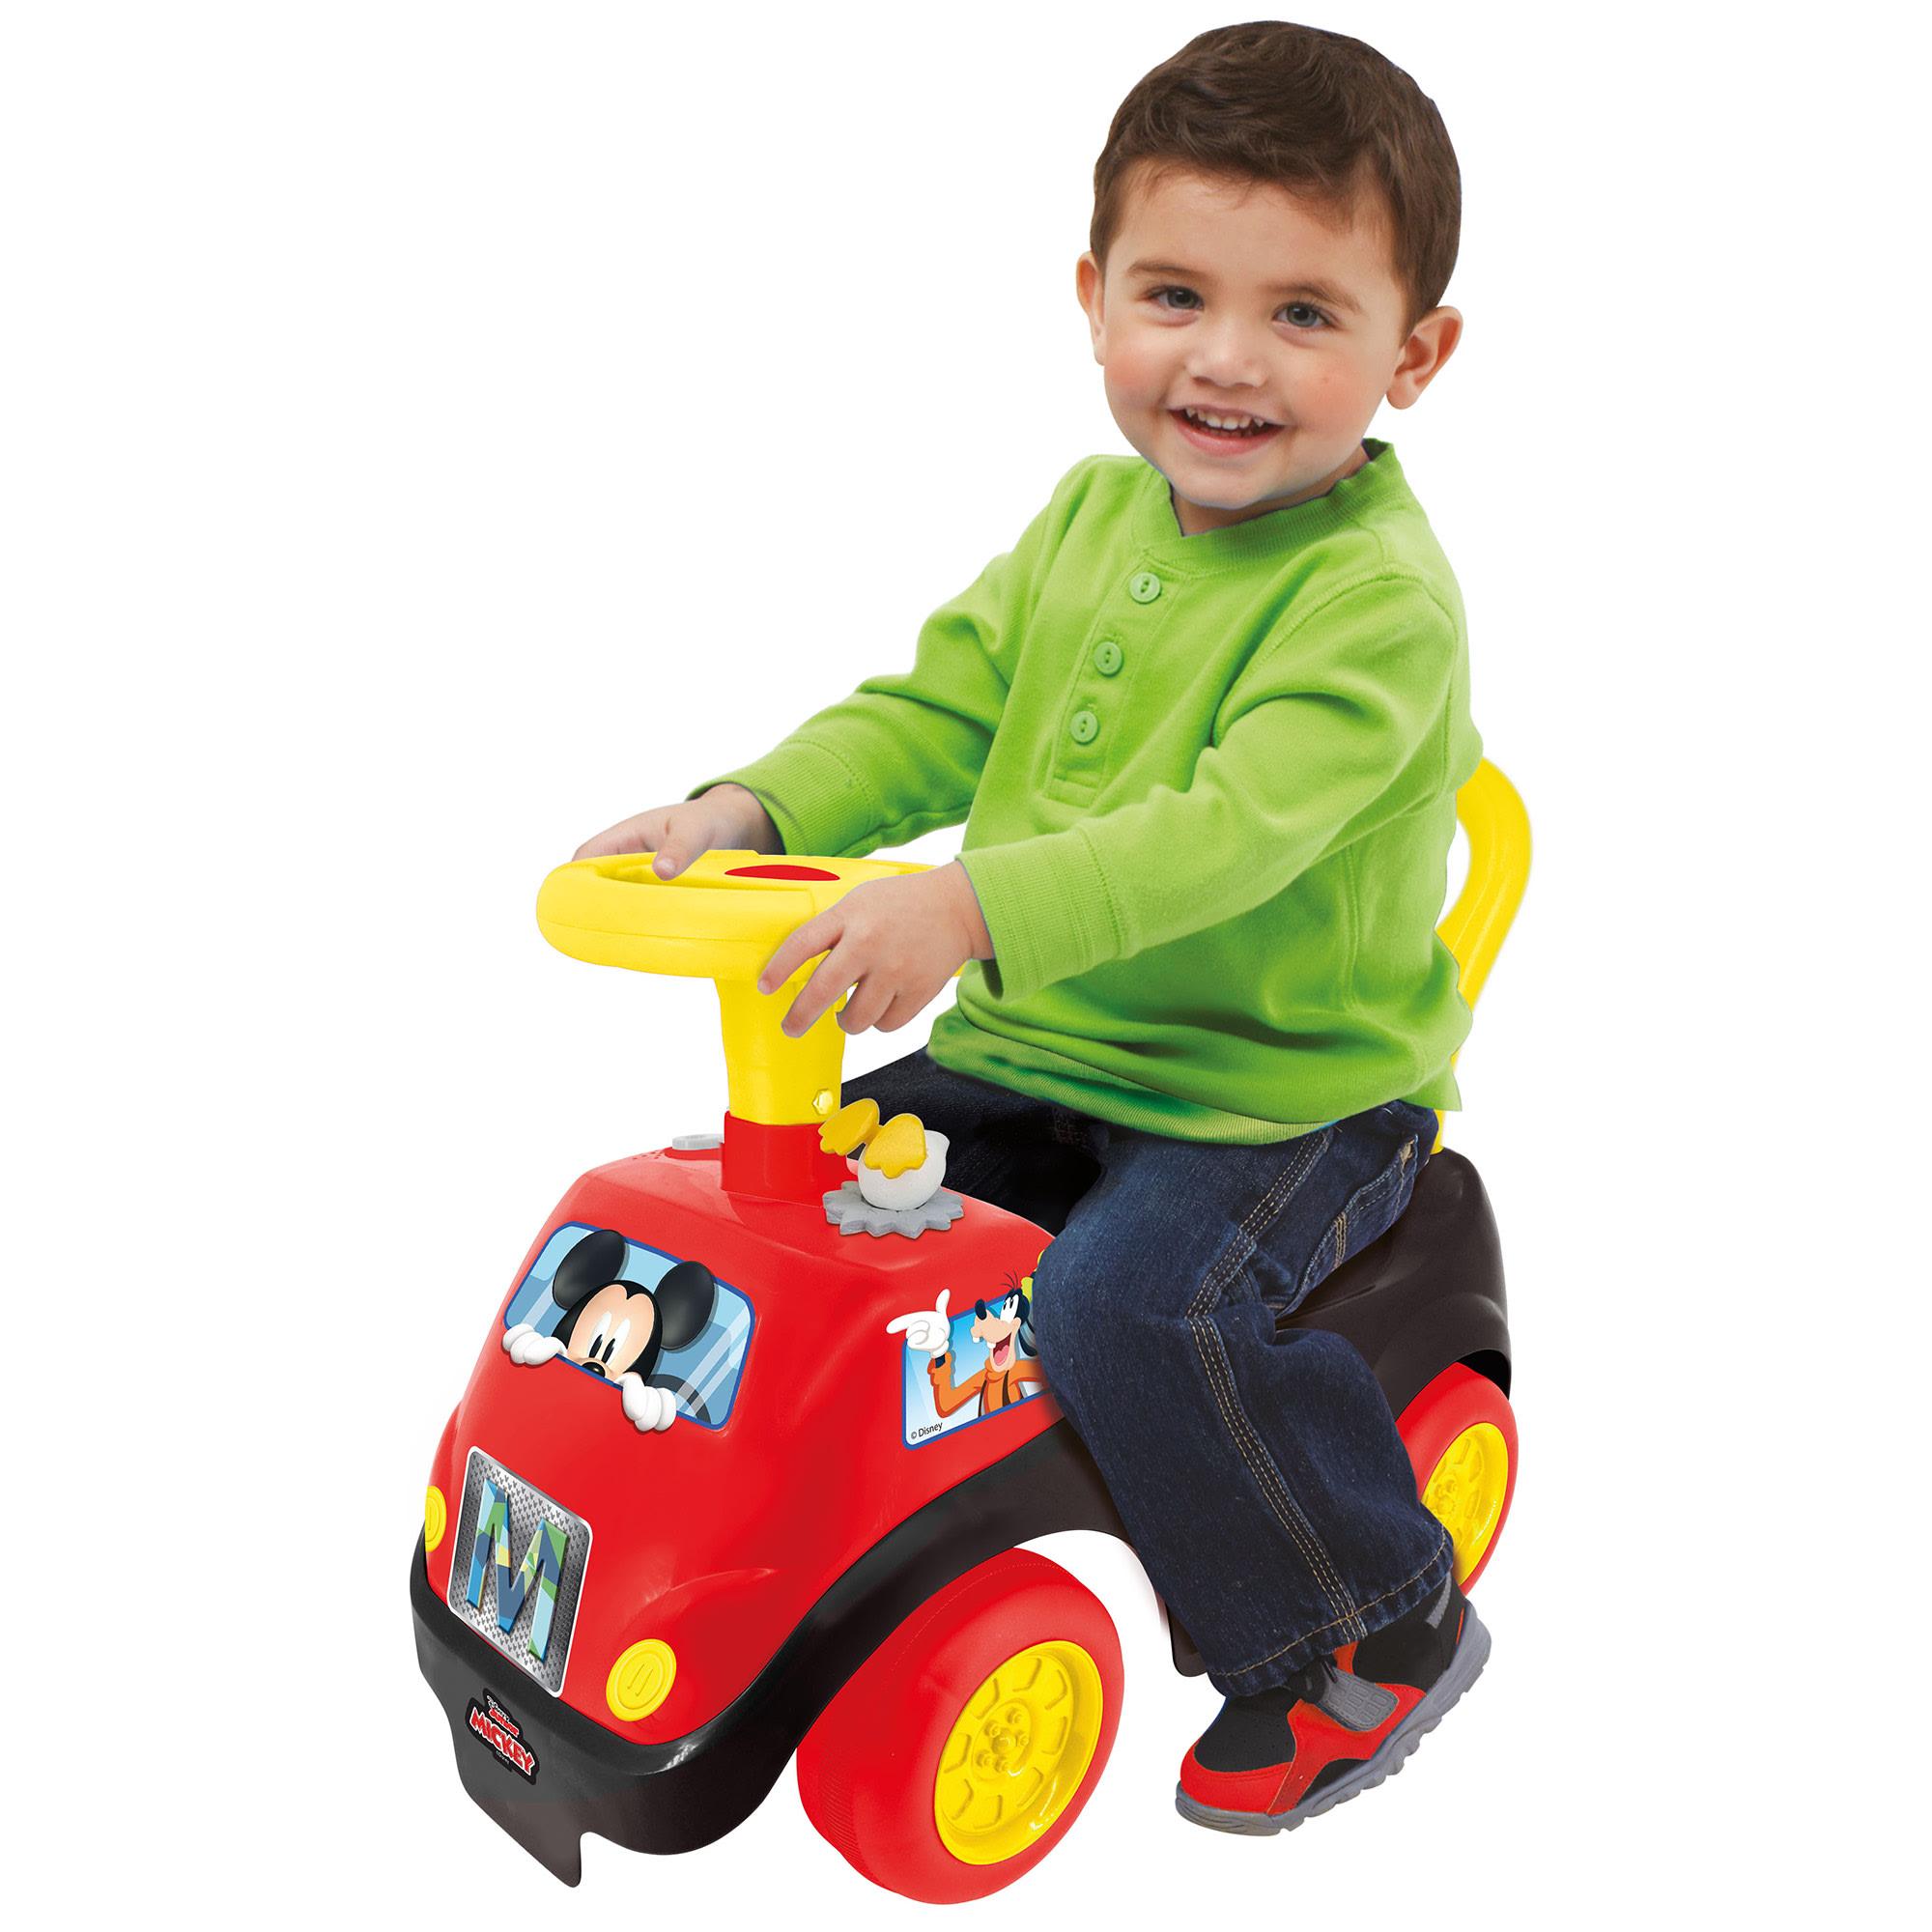 Kiddieland Disney Lights 'N' Sounds Ride-On: Mickey Mouse Kids Interactive Push Toy Car, Foot To Floor, Toddlers, Ages 12-36 Months - image 4 of 5